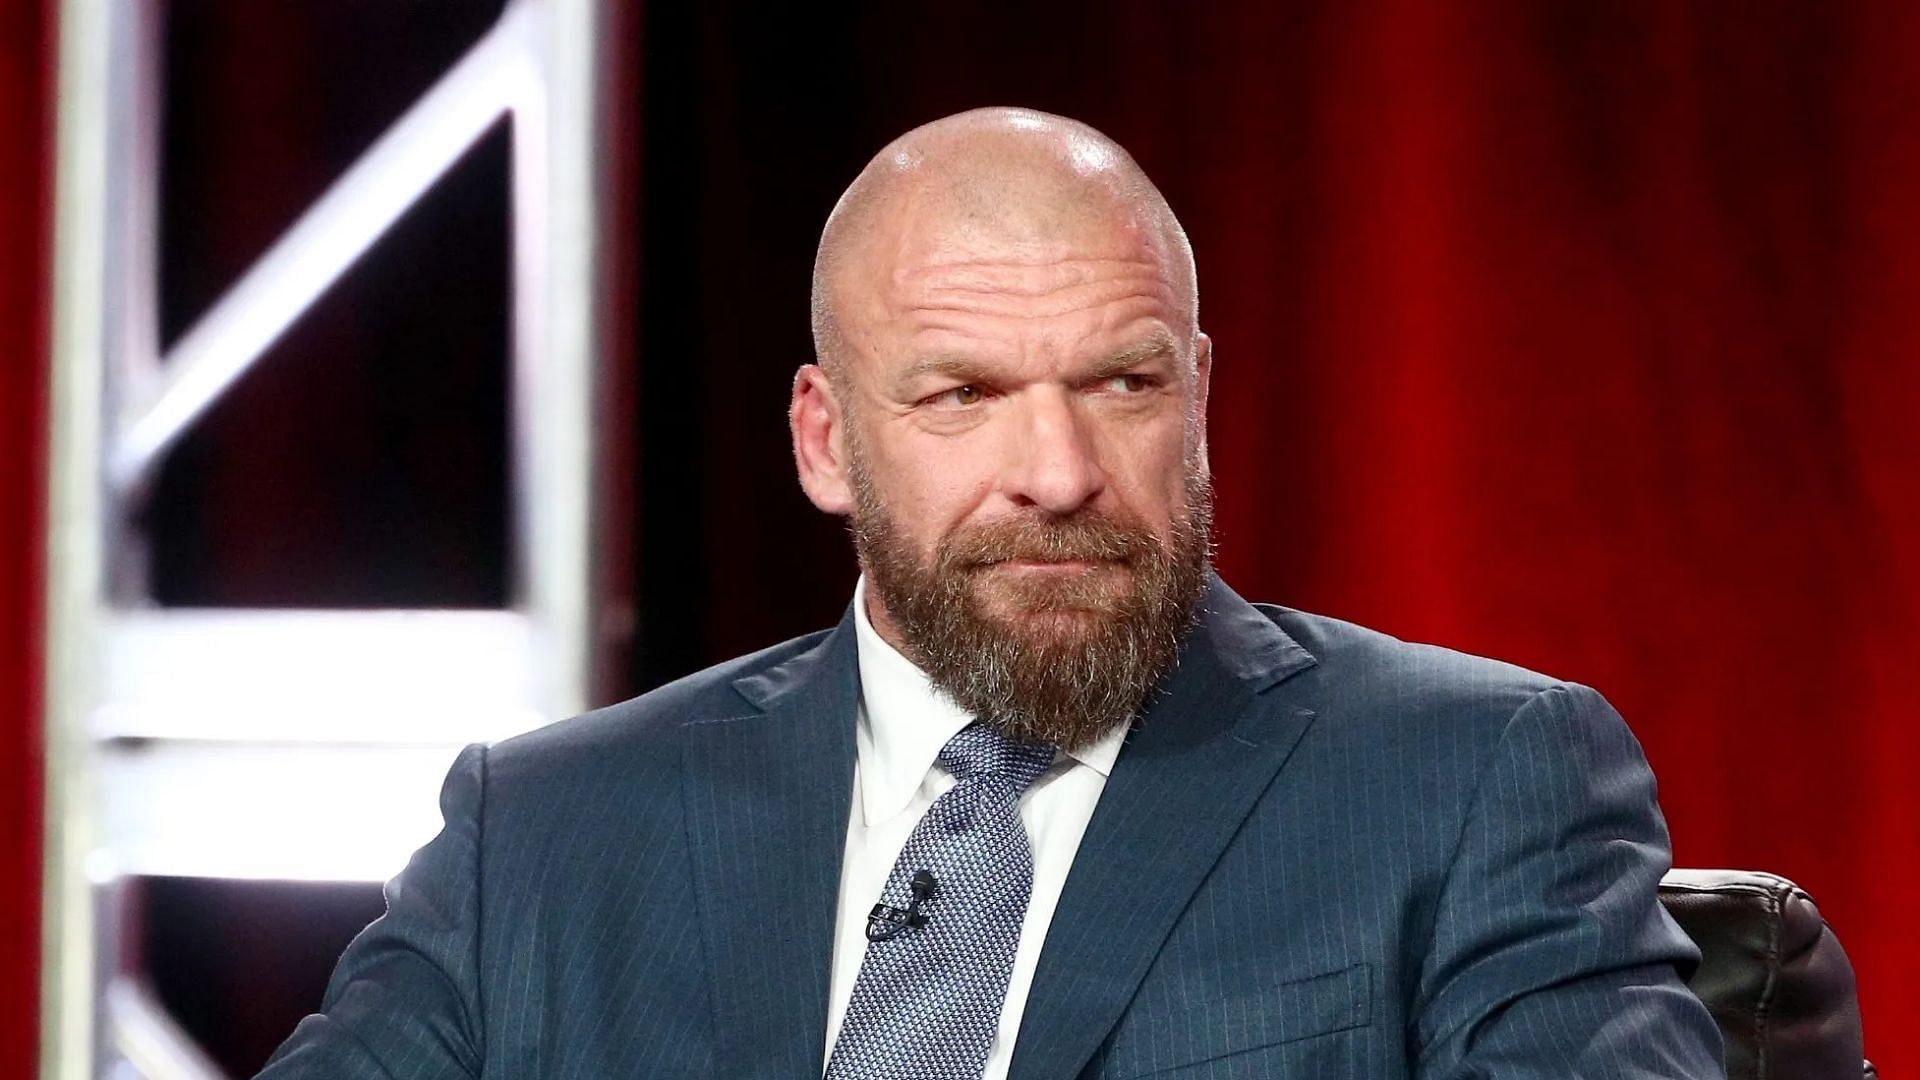 Triple H has brought back the star to WWE